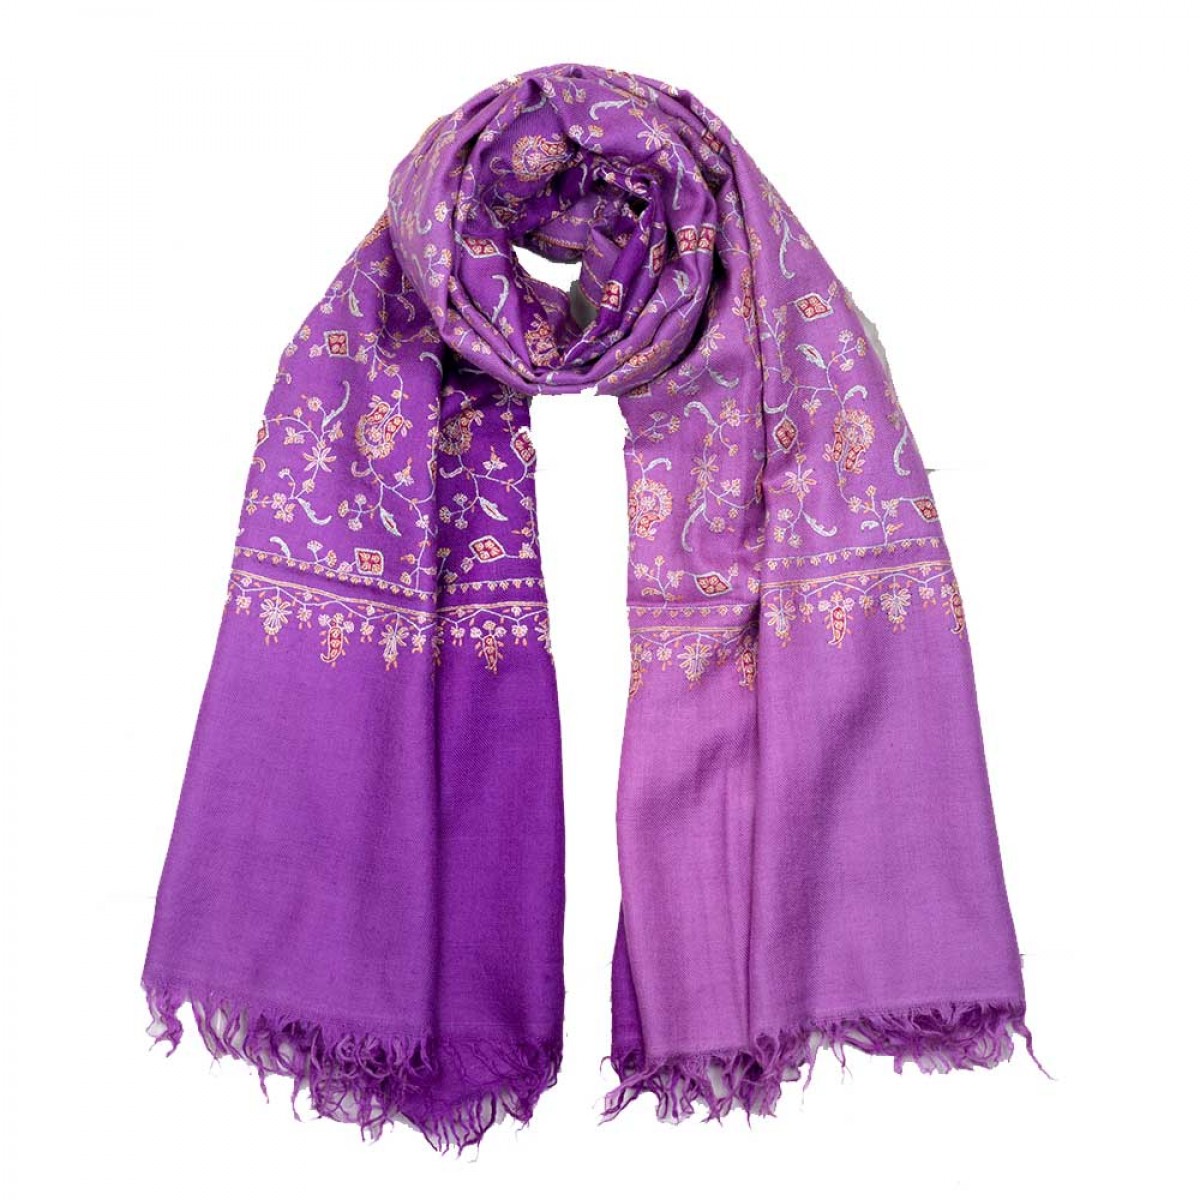 Embroidered Pashmina Shawls - Double Shaded of Purple 